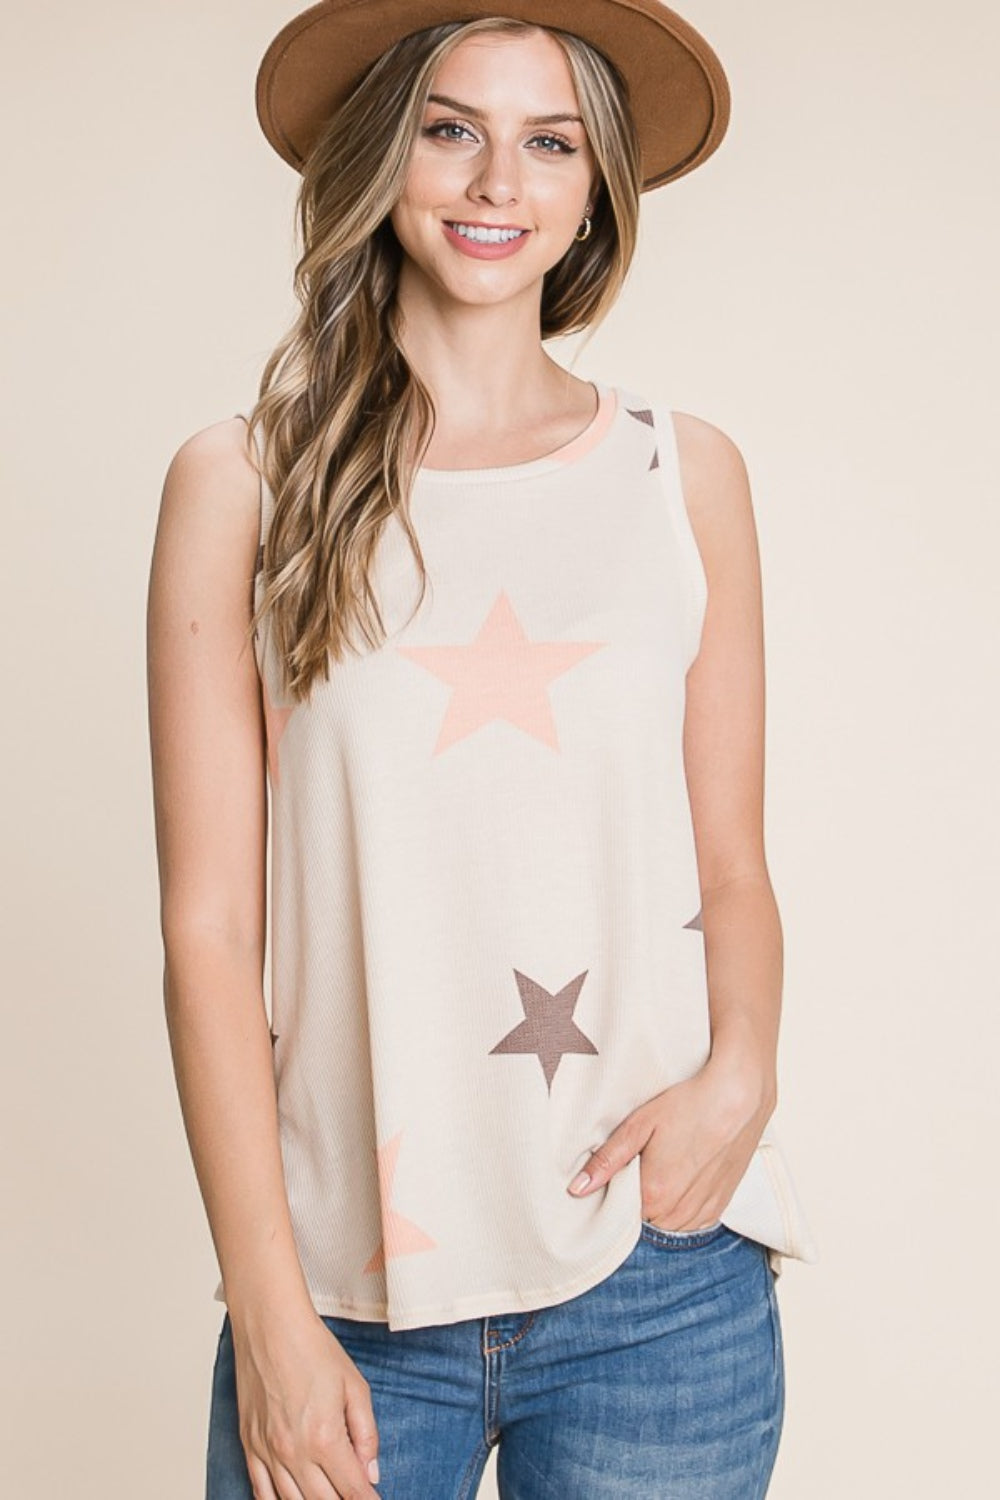 BOMBOM Star Print Round Neck Tank-Tank Tops-Inspired by Justeen-Women's Clothing Boutique in Chicago, Illinois